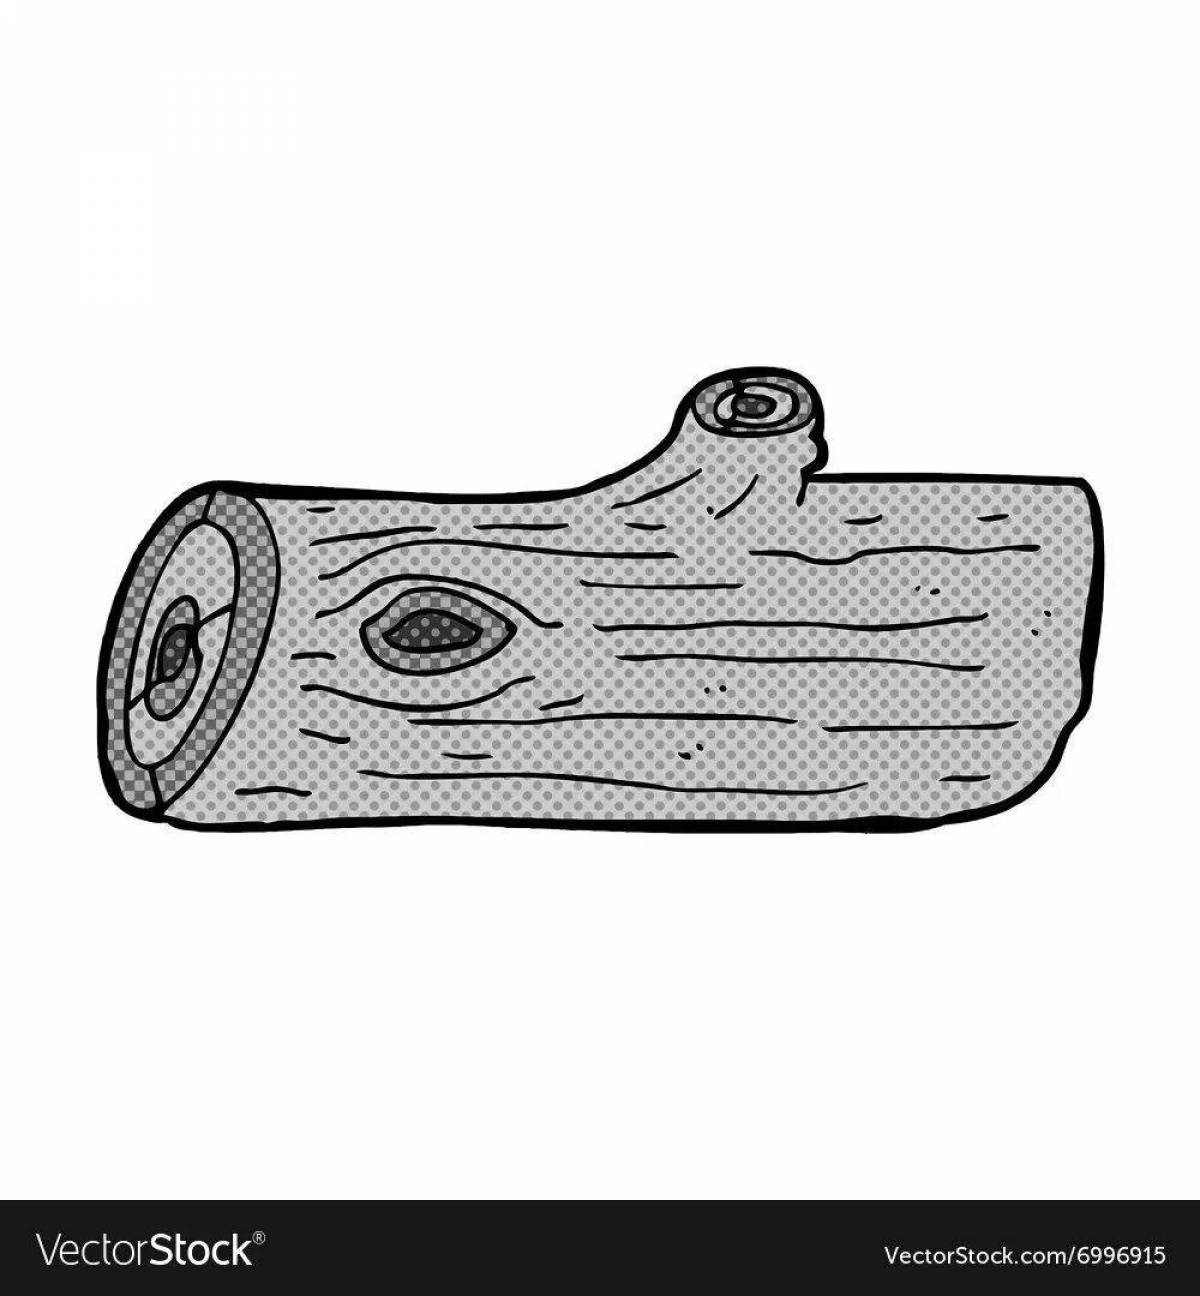 Coloring page of bright log